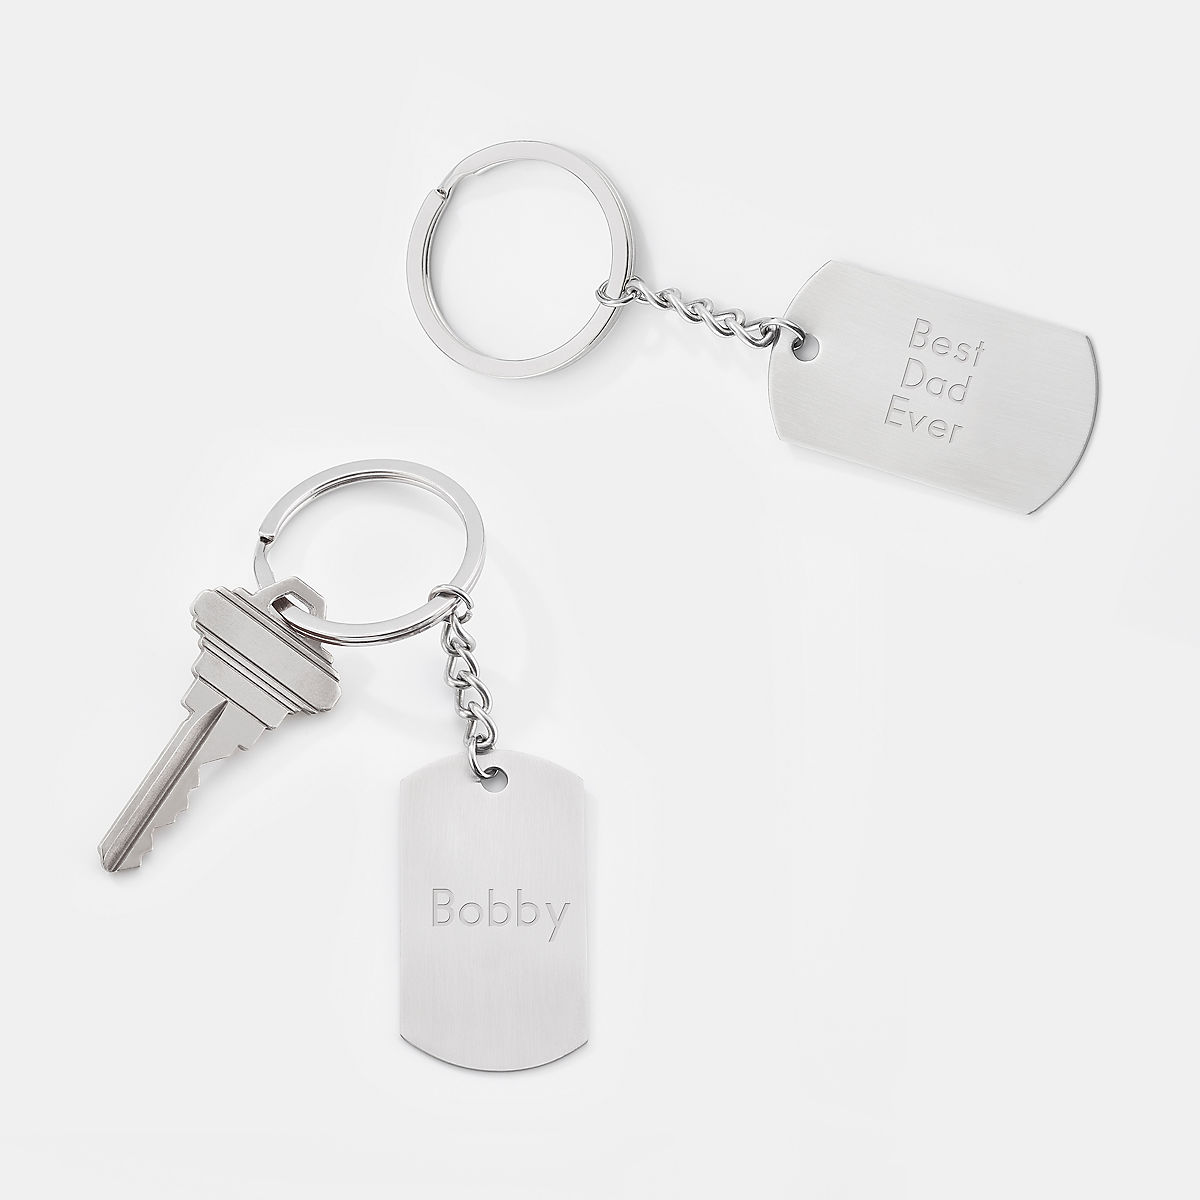 PERSONALIZED SILVER STAINLESS STEEL DOG TAG KEYCHAIN CUSTOM ENGRAVED KEY CHAIN